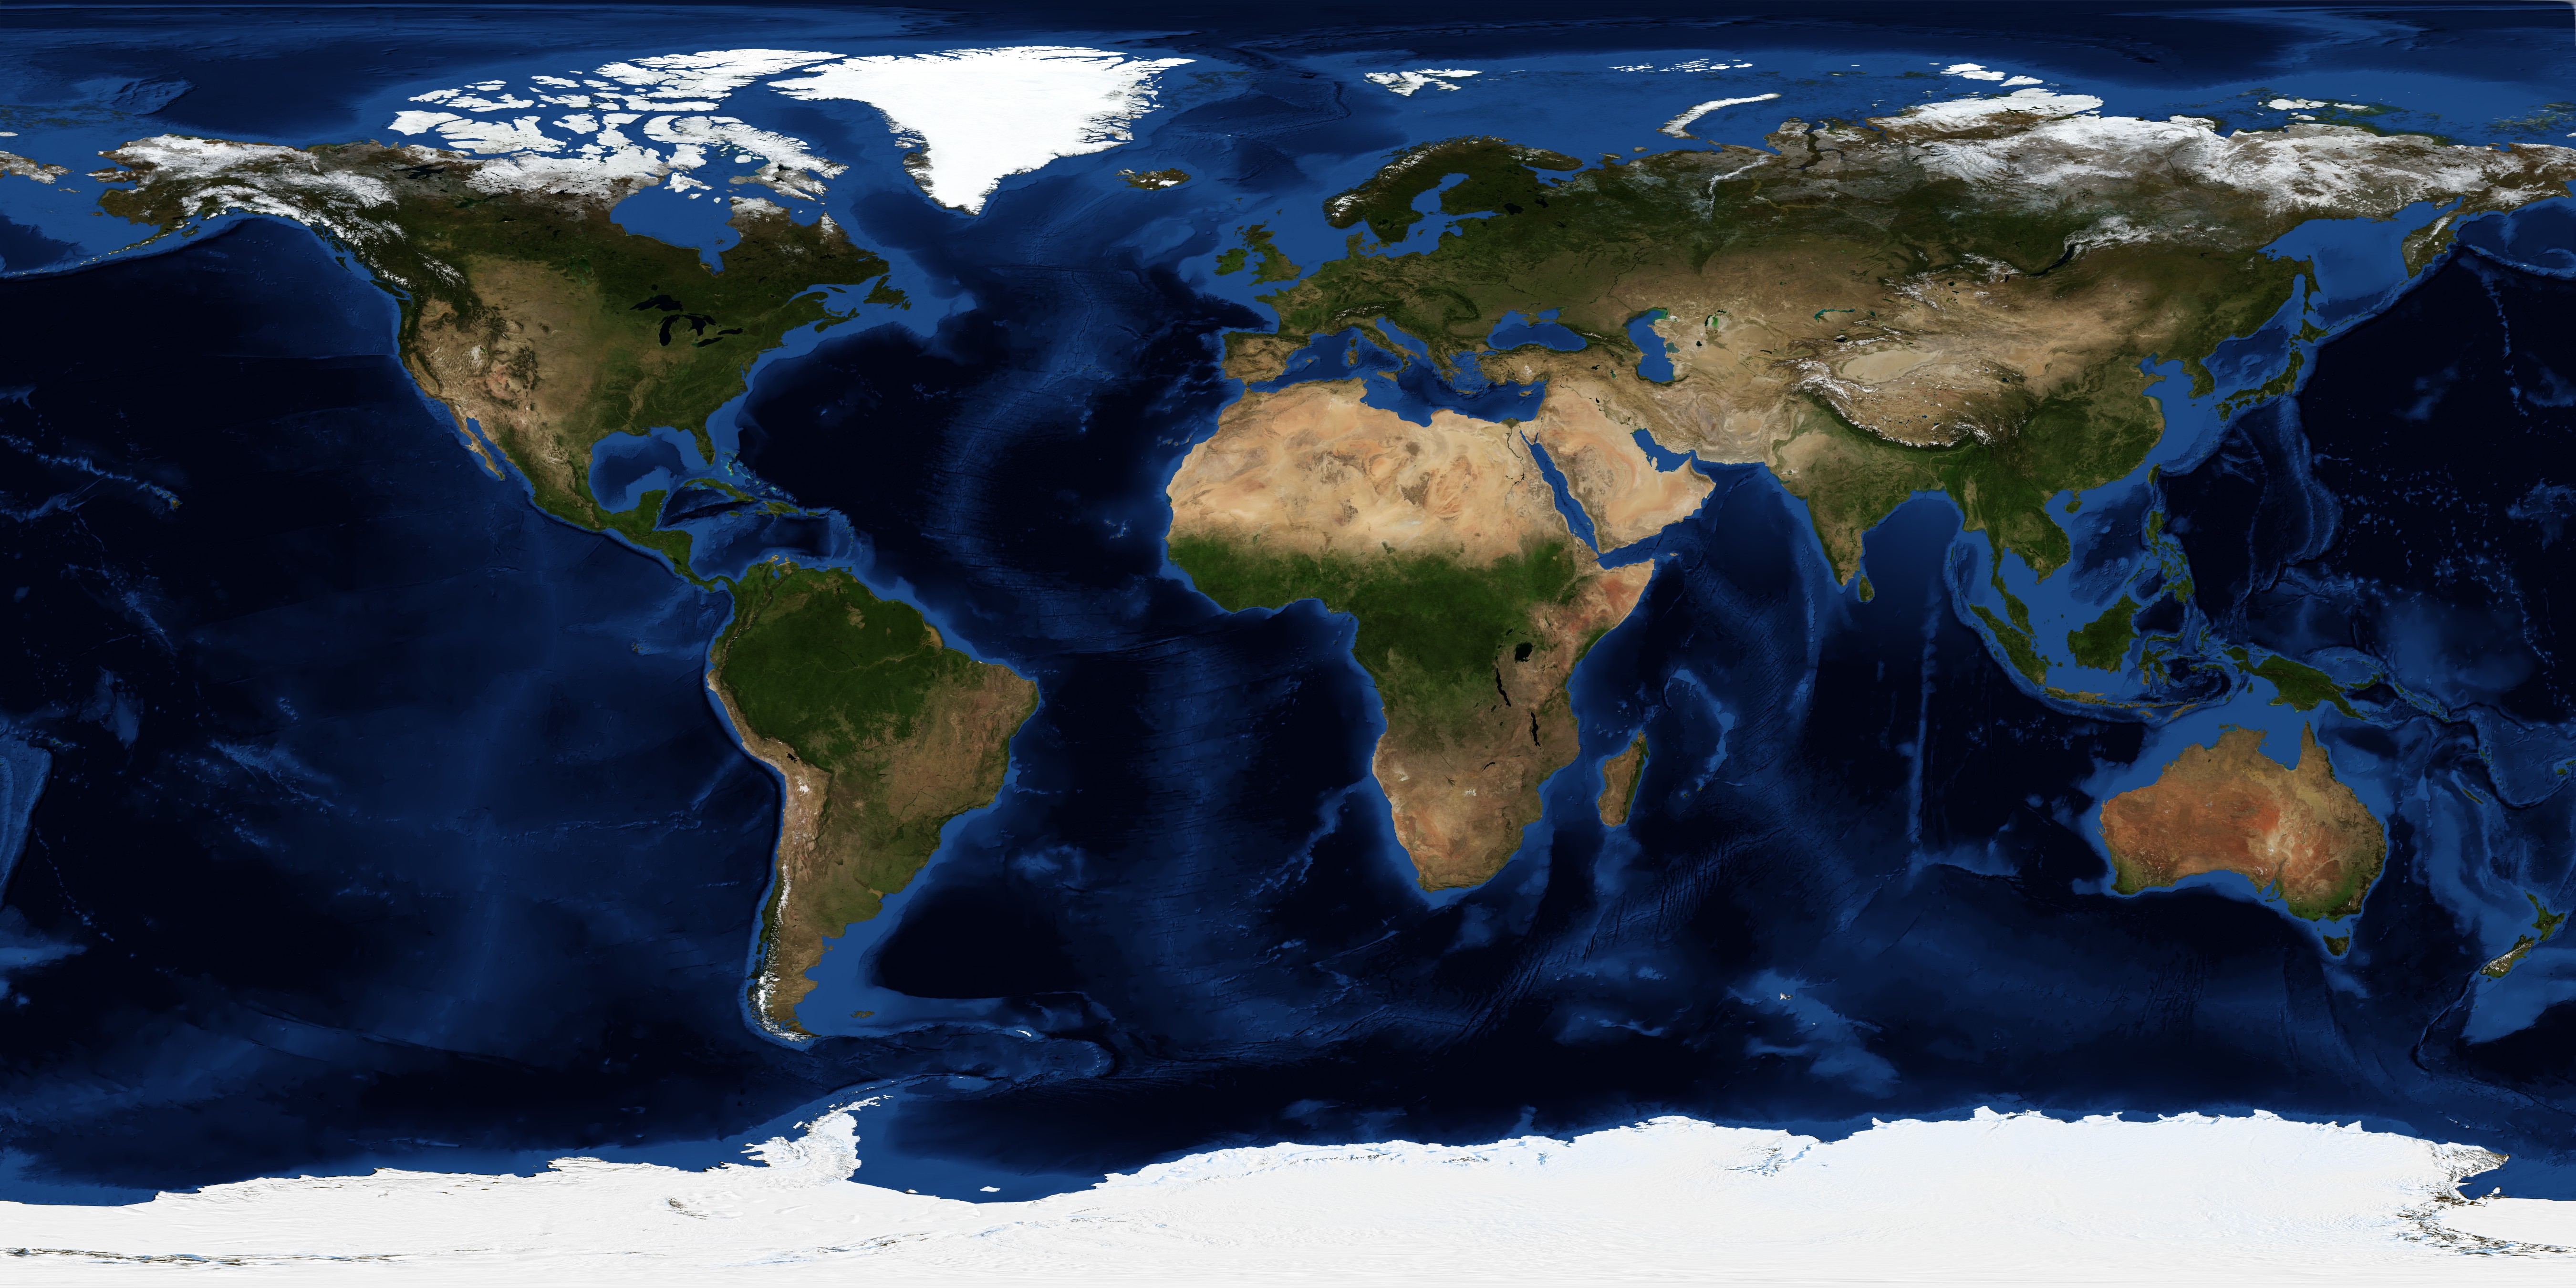 September, Blue Marble Next Generation w/ Topography and Bathymetry - related image preview